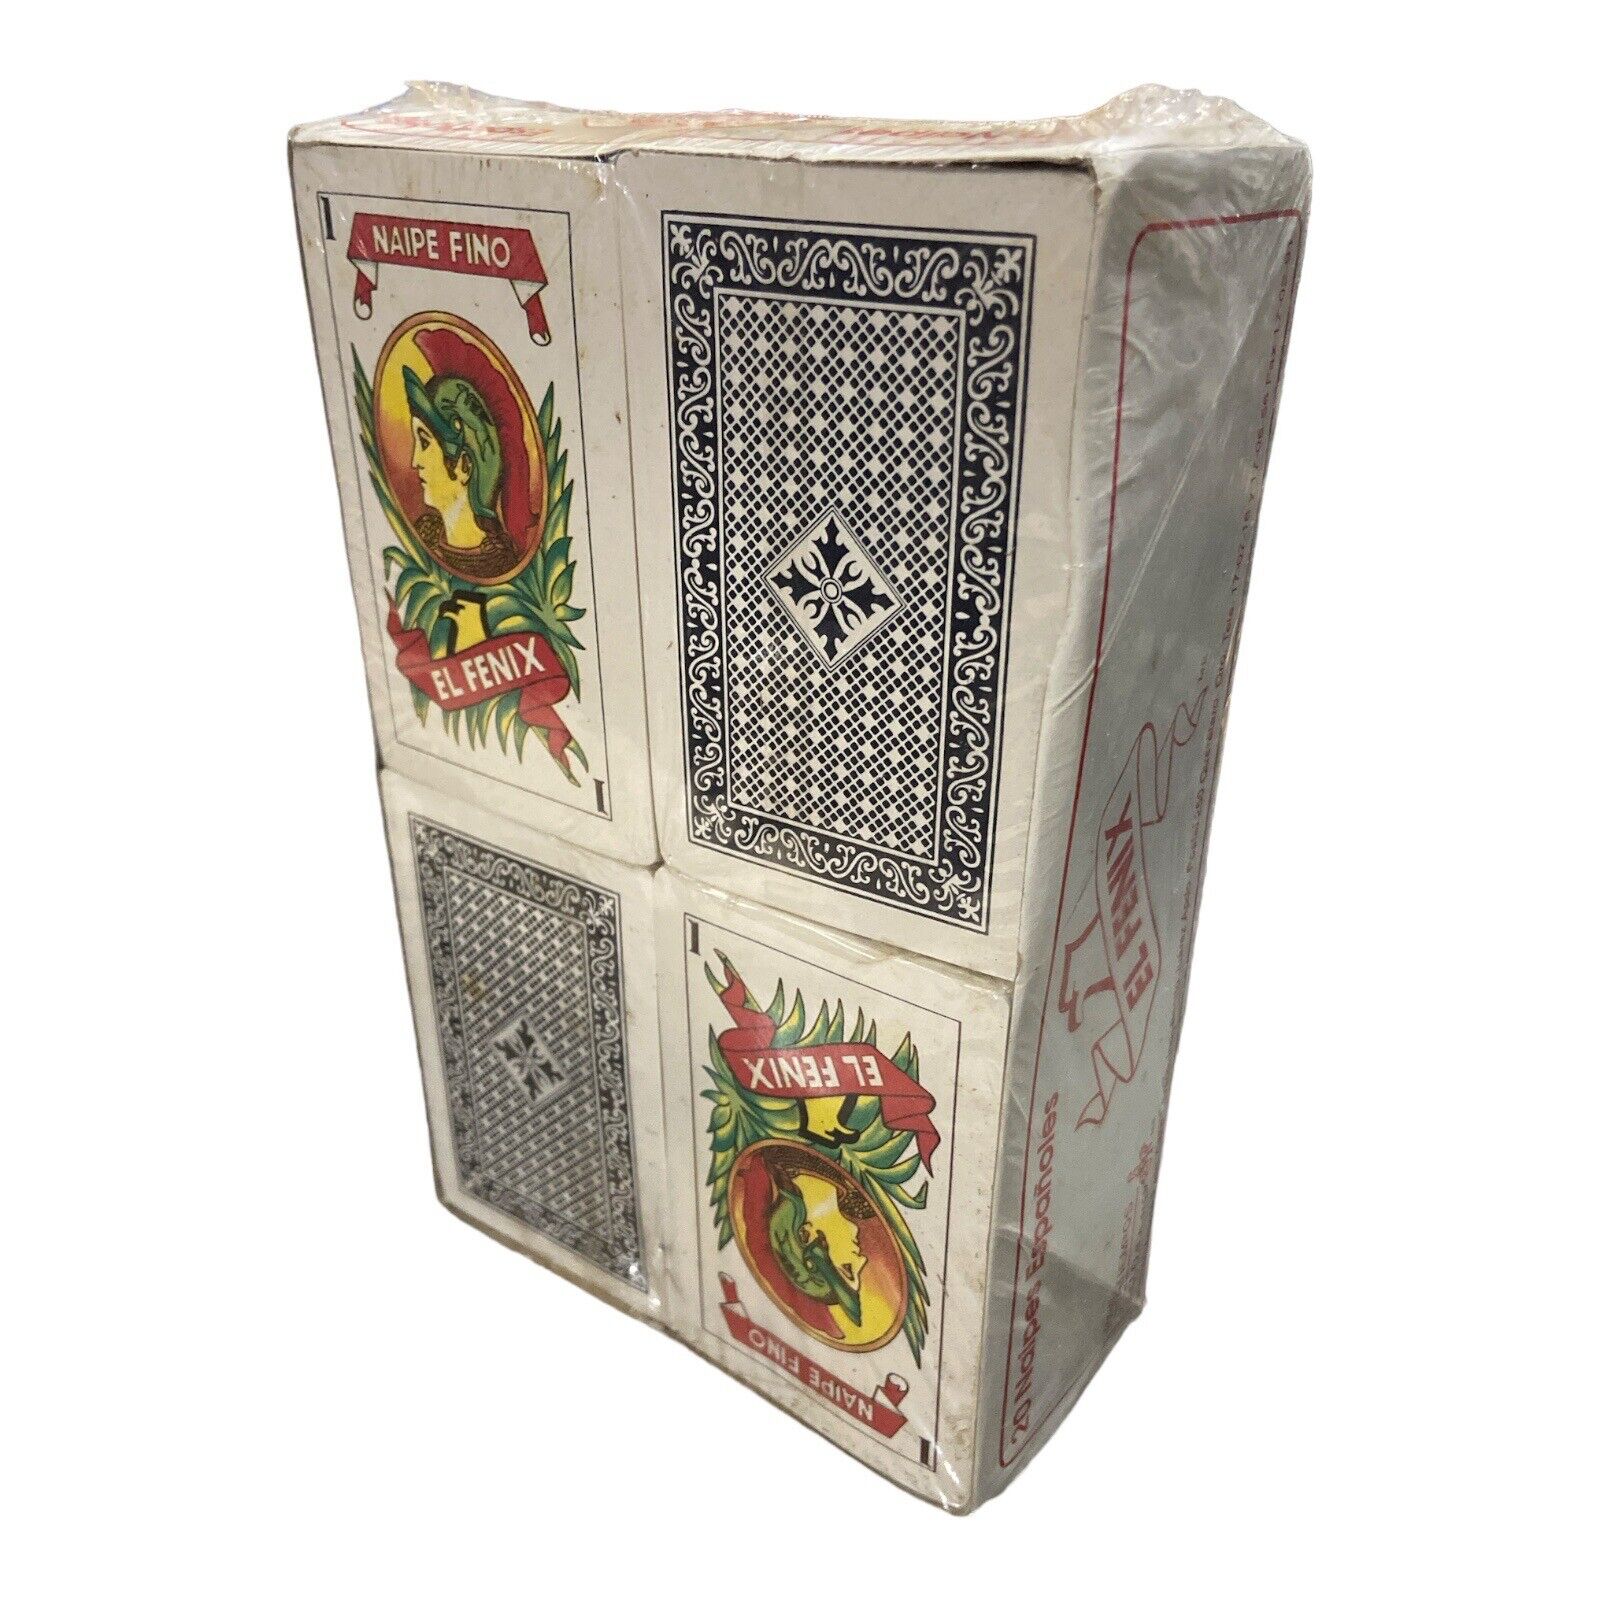 VTG El Fenix Naipe Fino Clemente Jacques Mexican Playing Cards Sealed Box Rare